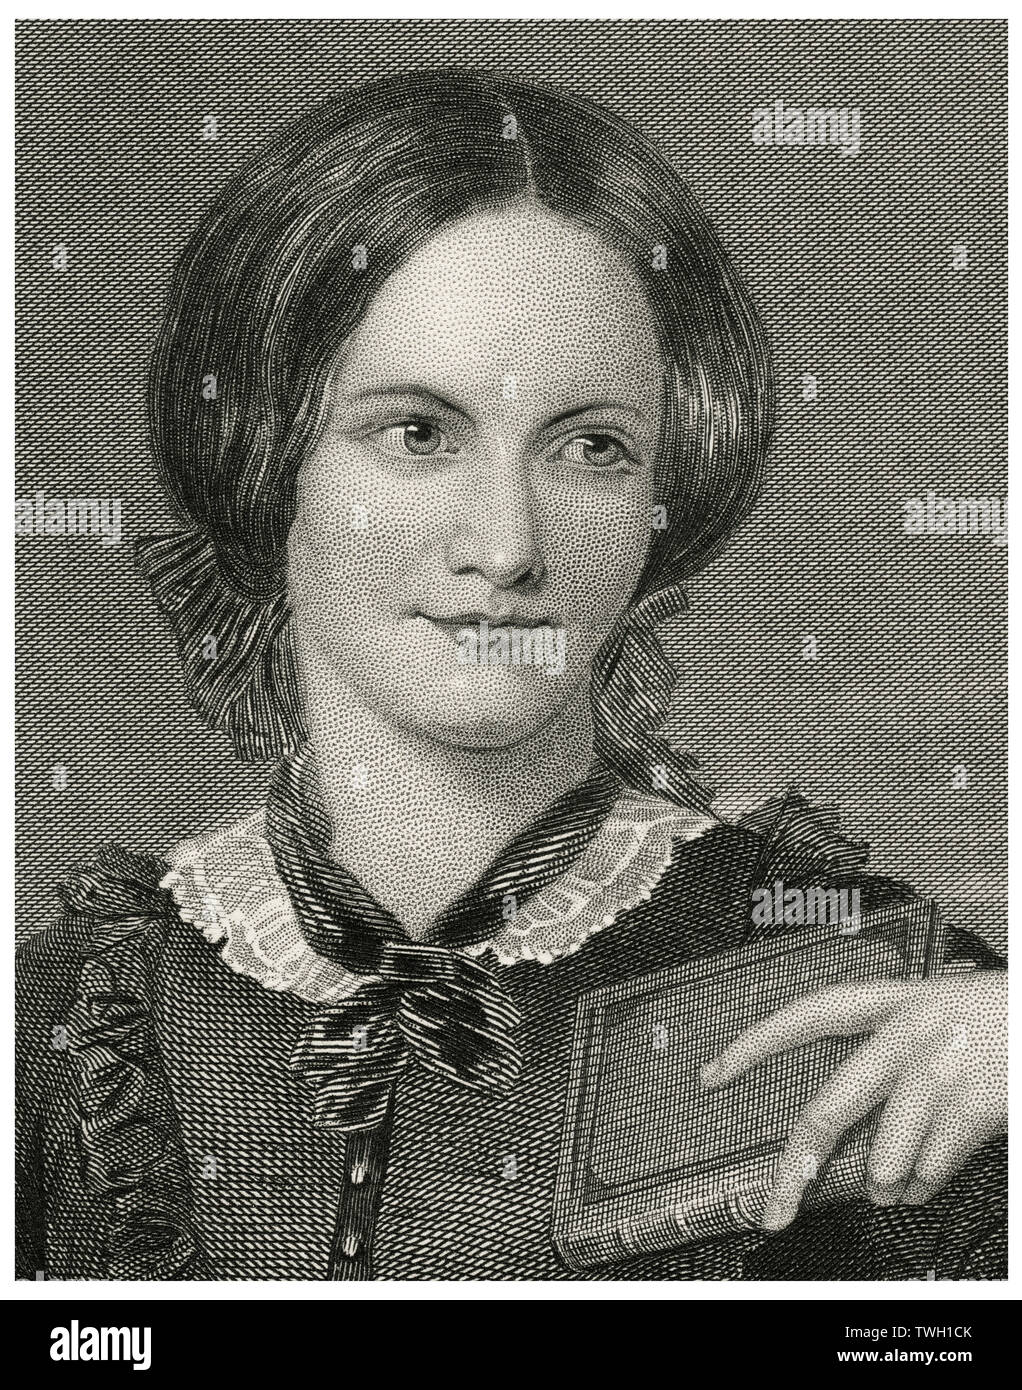 NPG 1444; Unknown woman, formerly known as Charlotte Brontë - Portrait -  National Portrait Gallery